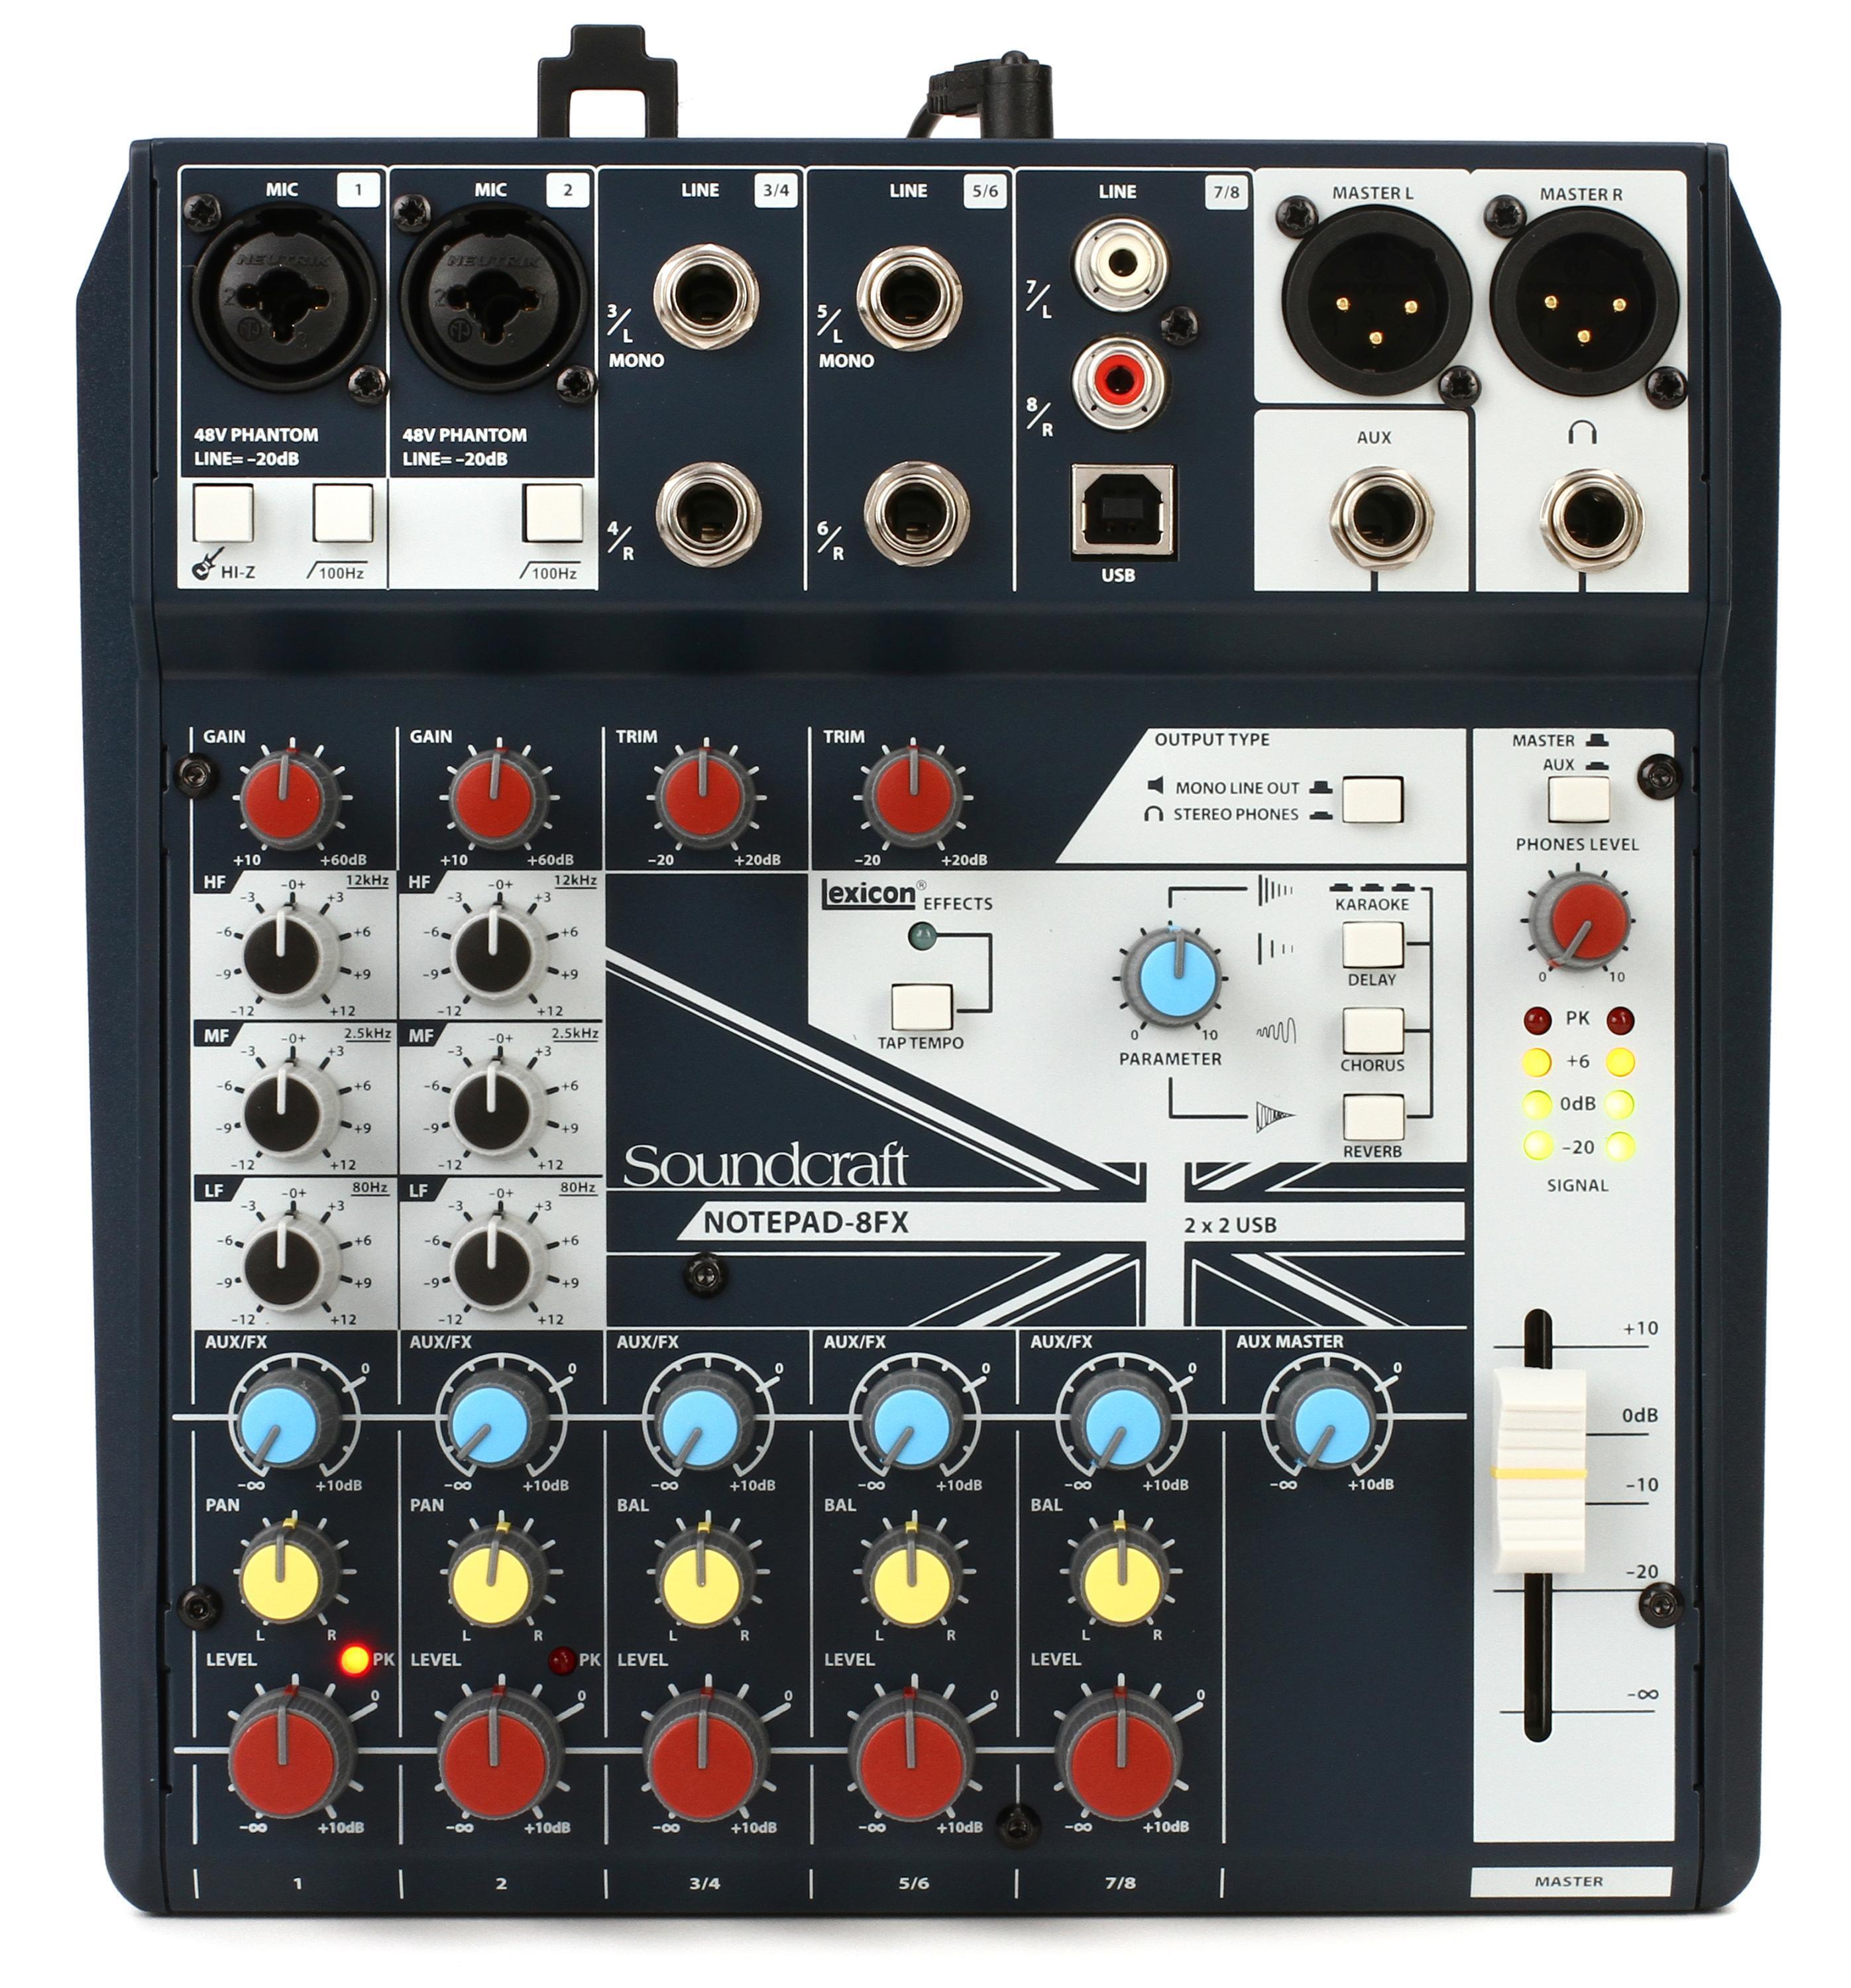 Bundled Item: Soundcraft Notepad-8FX Mixer with Effects